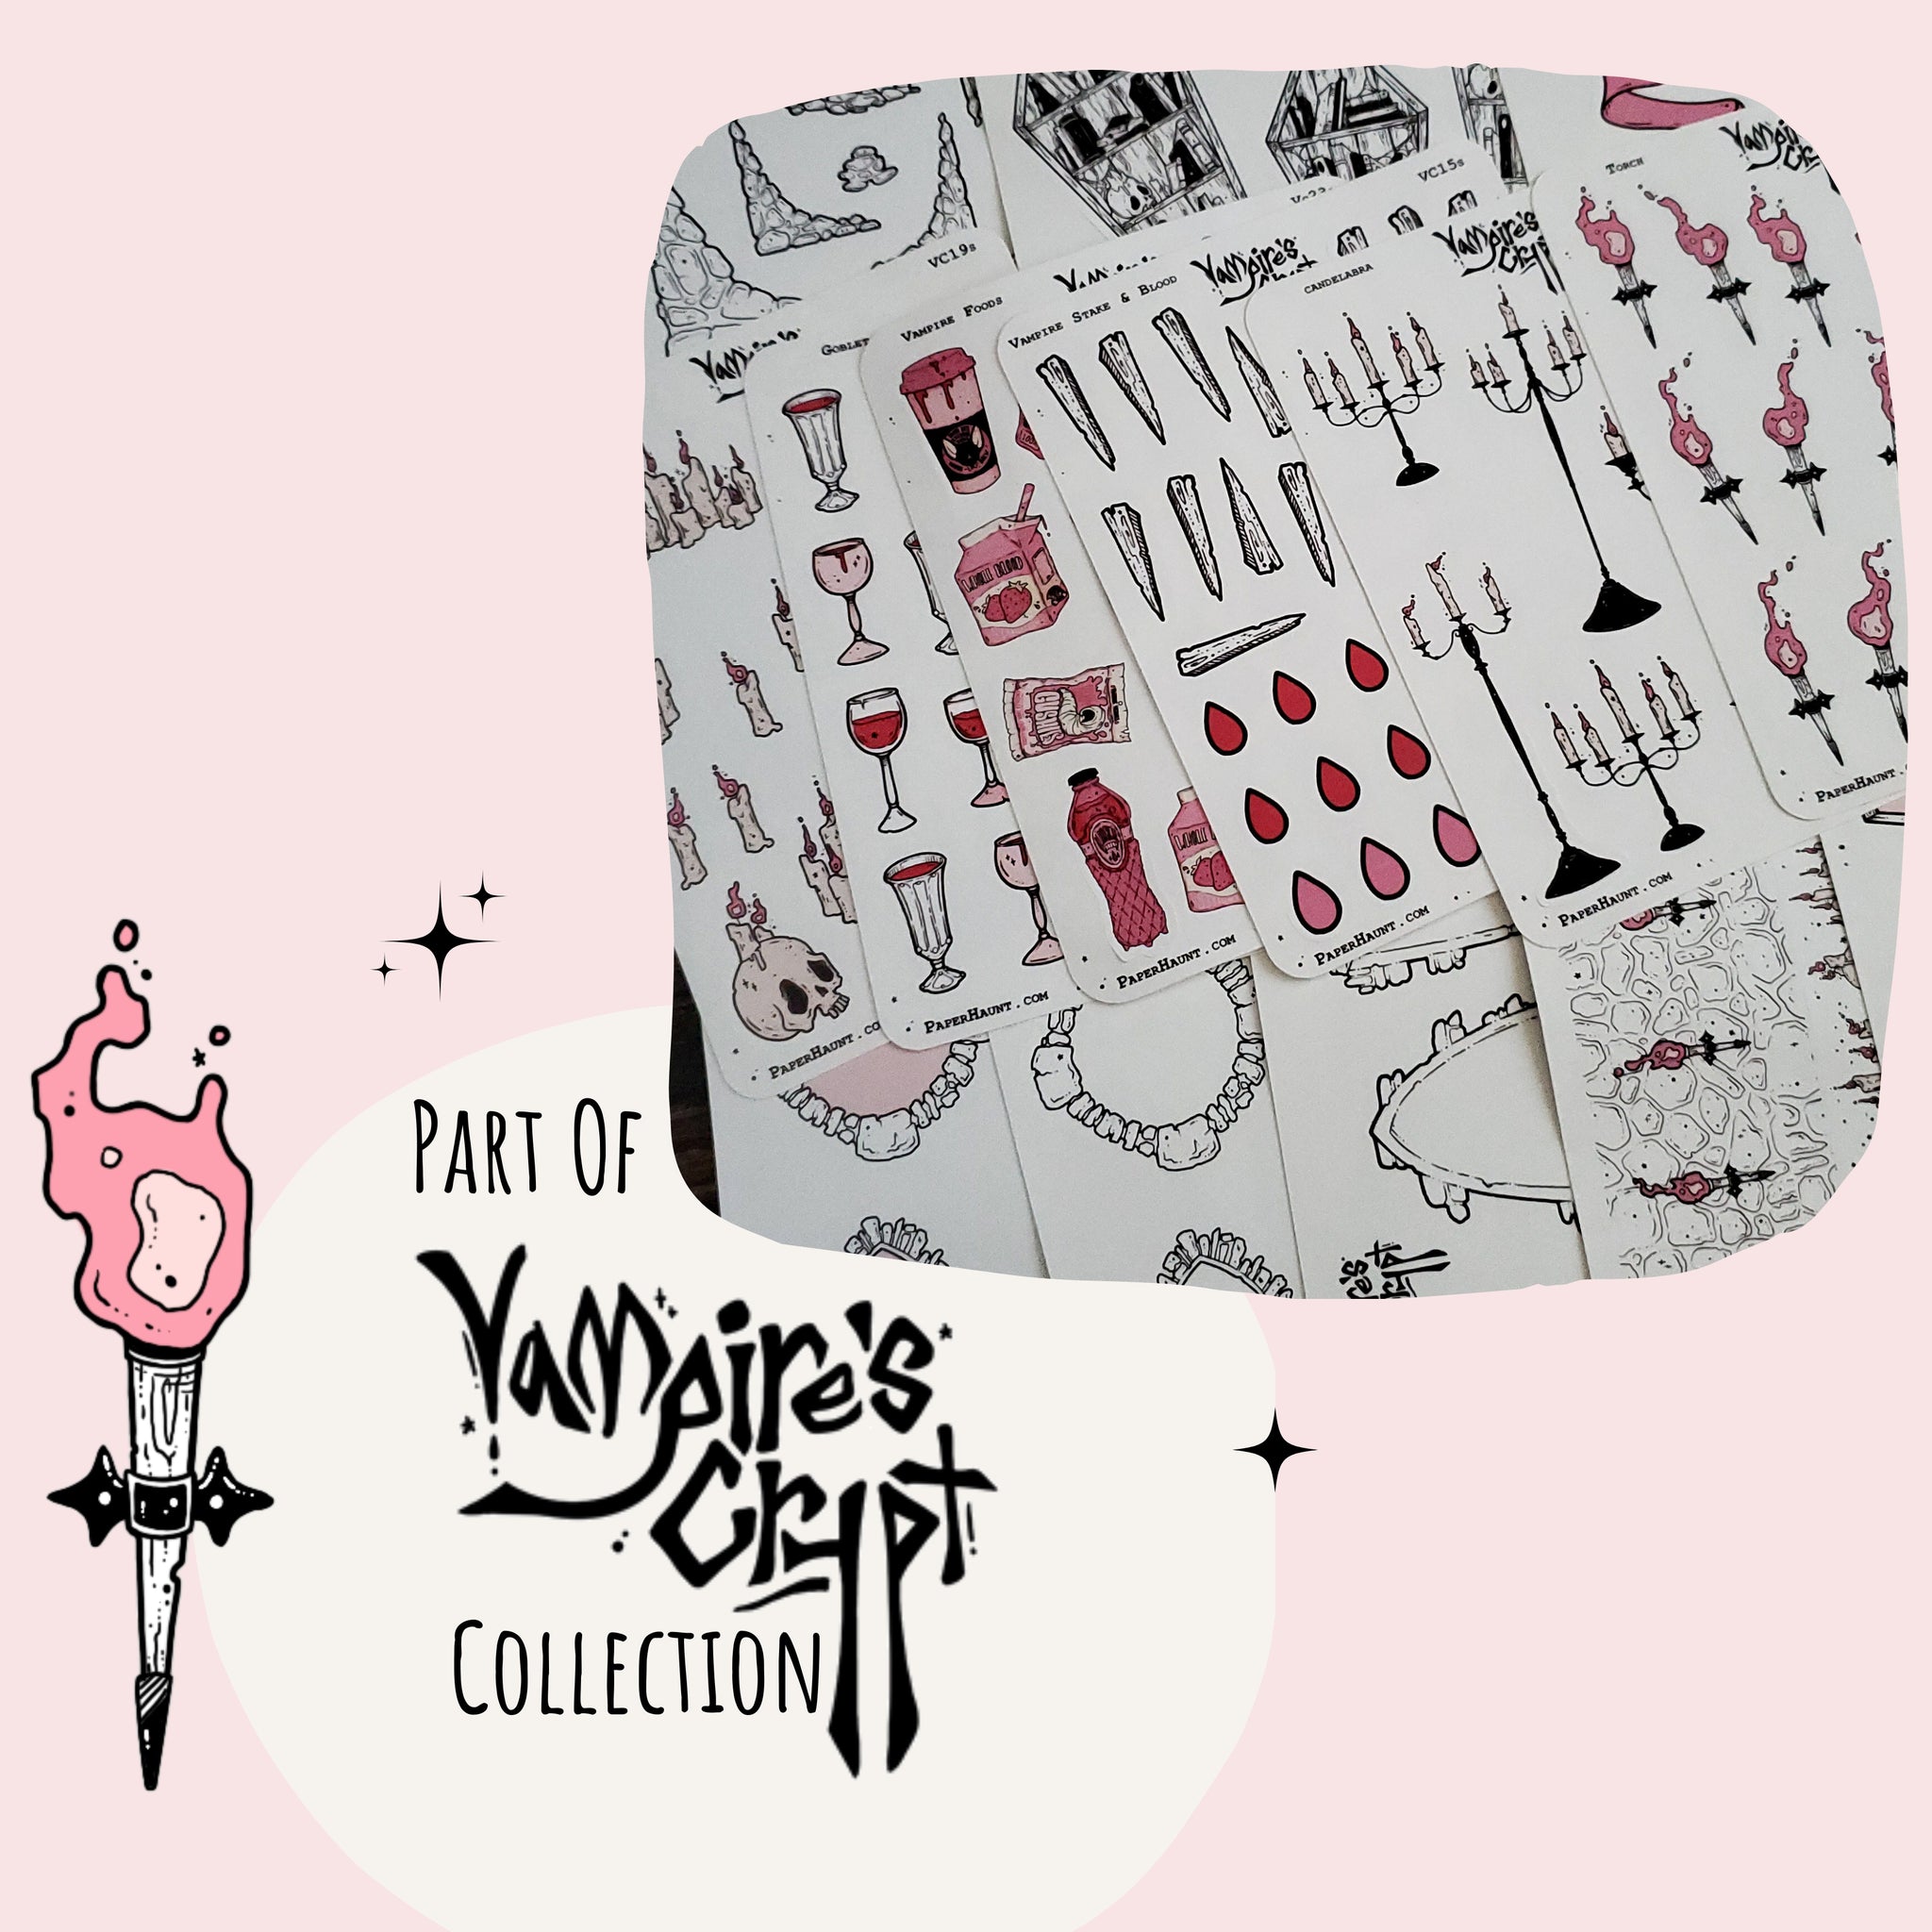 Vampire Stake and Blood Droplets STICKER Sheet